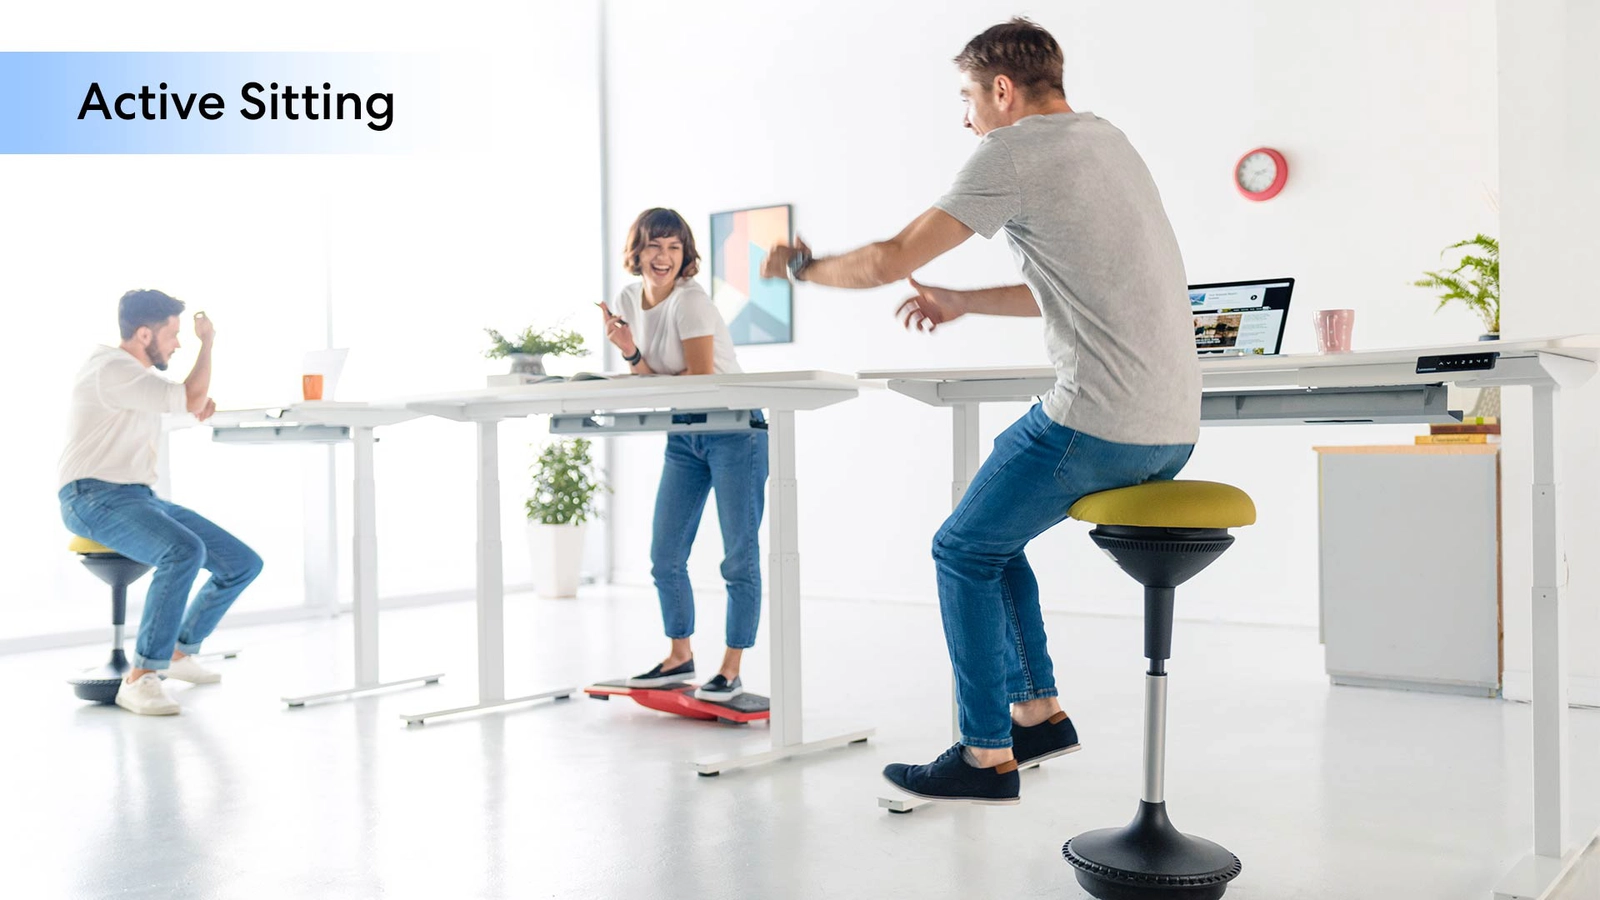 How Active Sitting Makes A Difference